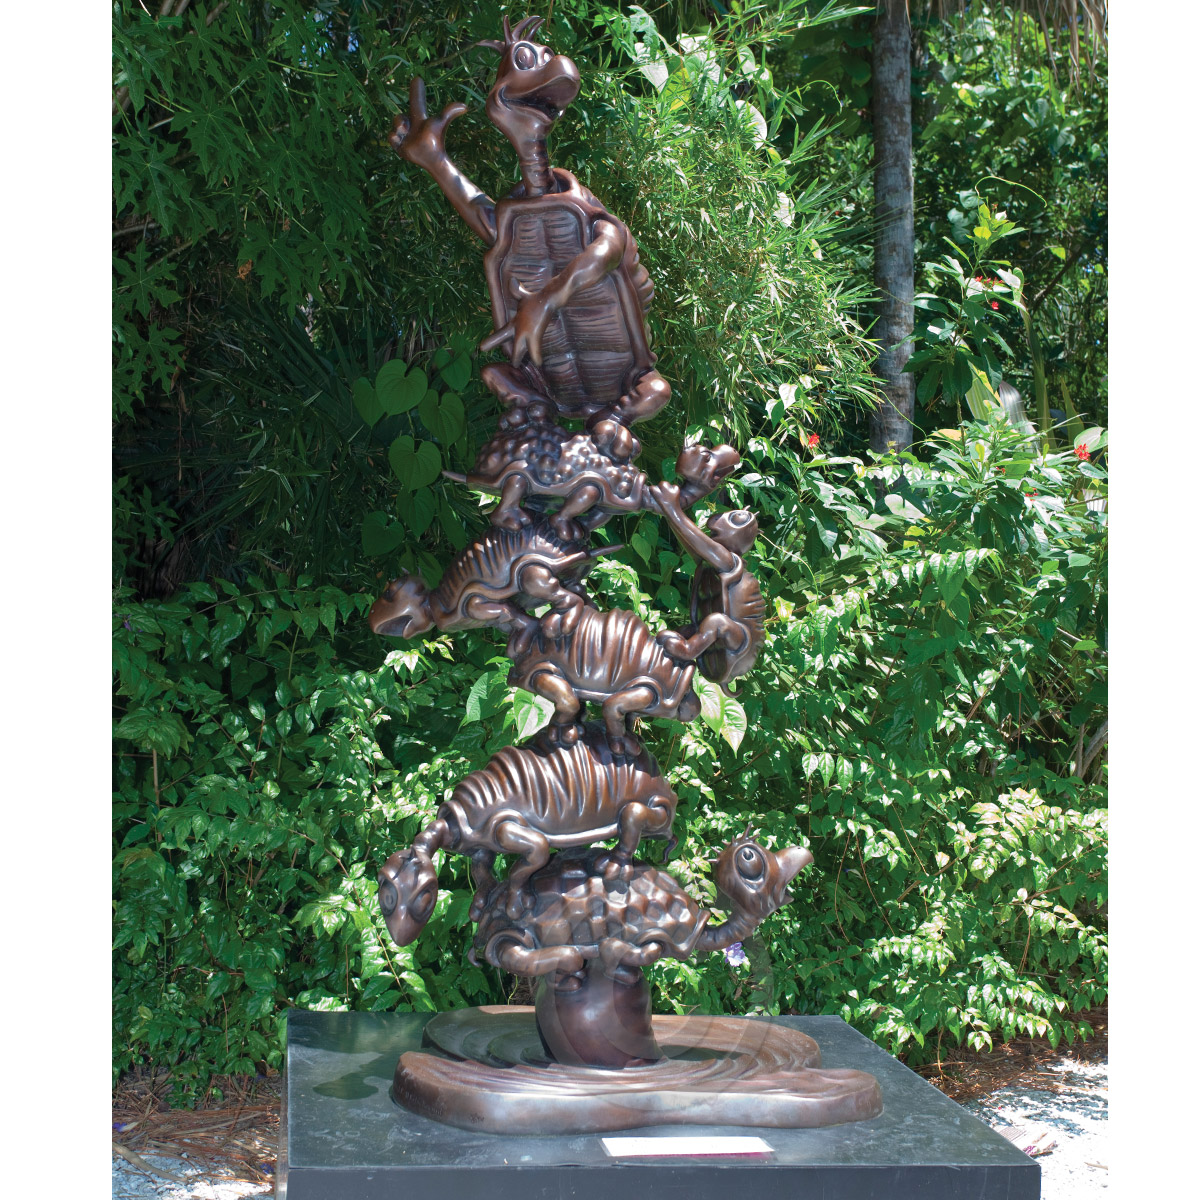 Turtle Tower - Large Scale Bronze Sculpture by Dr Seuss